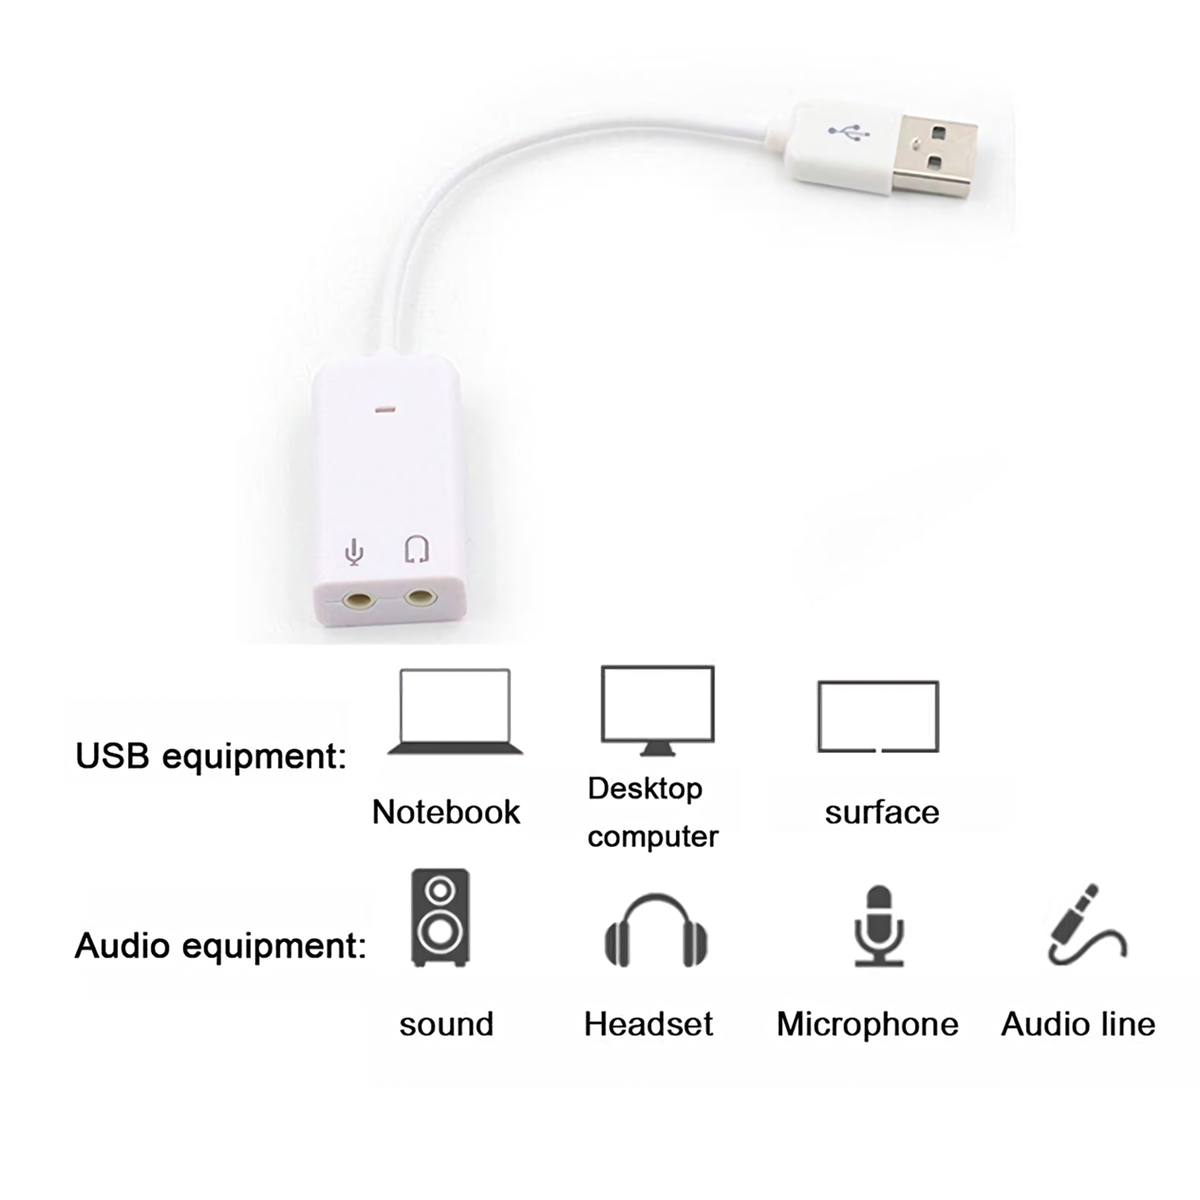 USB-20-External-Sound-Card-20cm-71-Channel-Sound-Card-w35mm-Headphone-and-Microphone-Jack-Interface--1890361-3